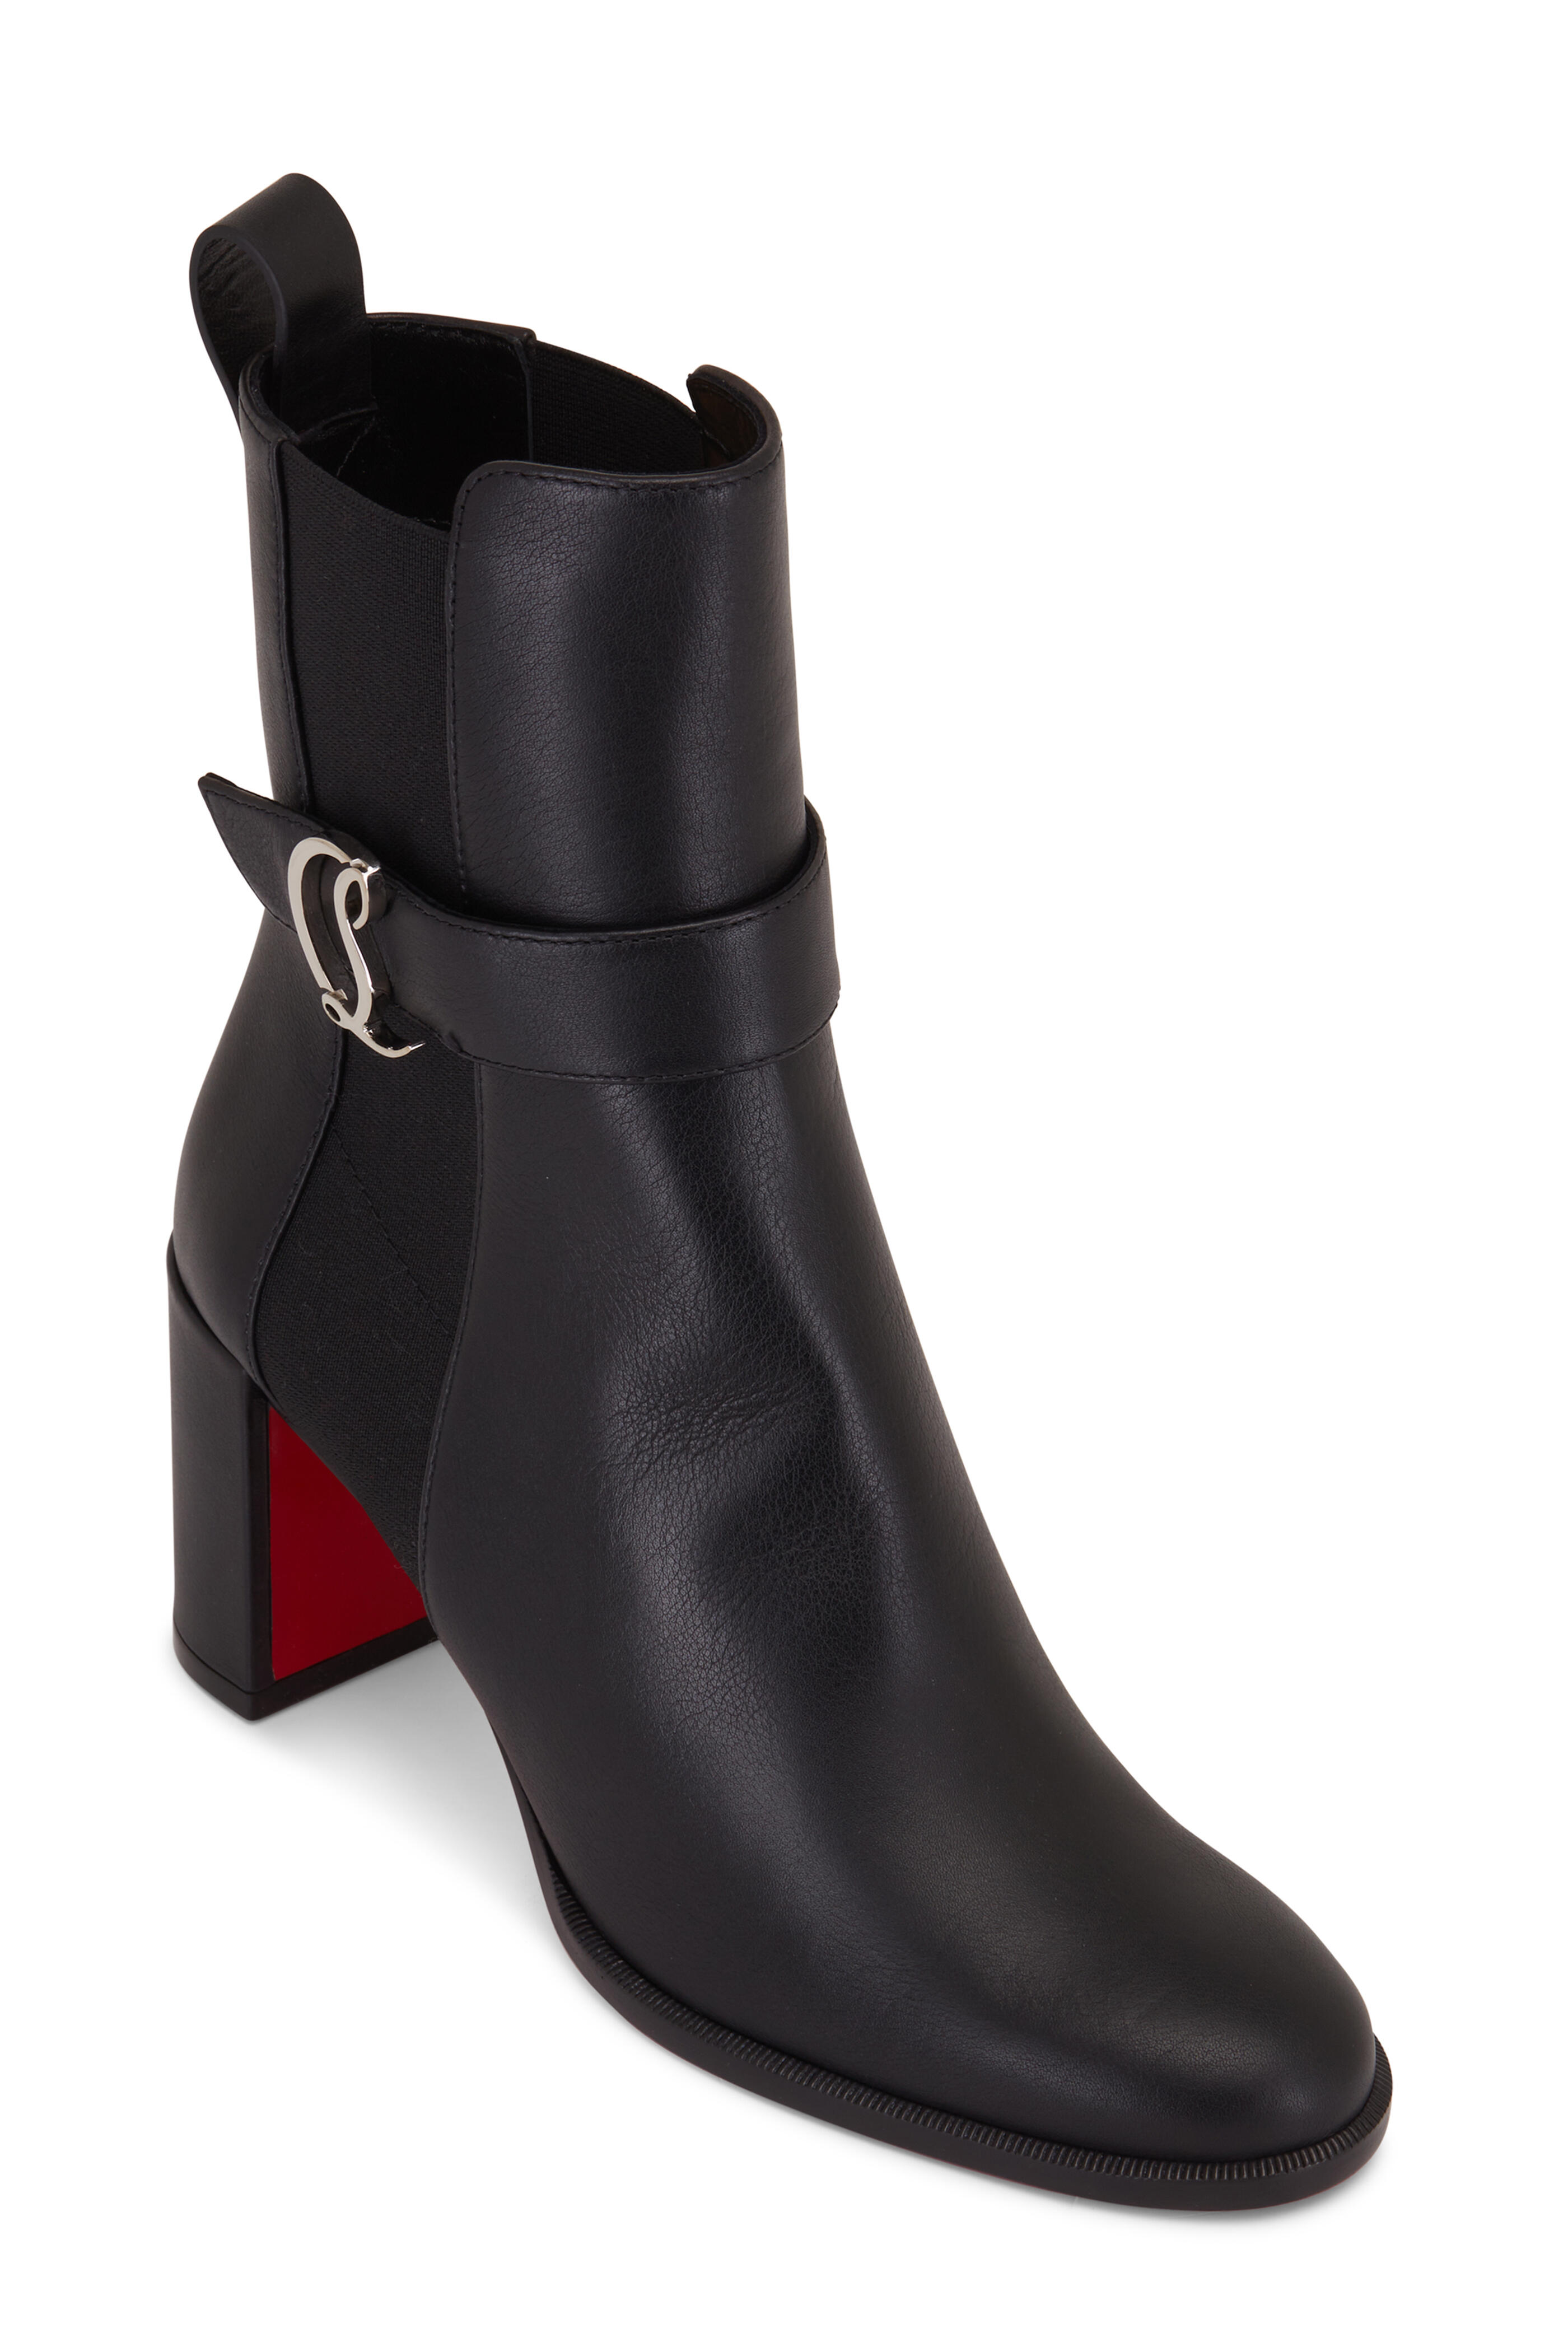 Christian Louboutin - Black Leather CL Chelsea Bootie, 70mm